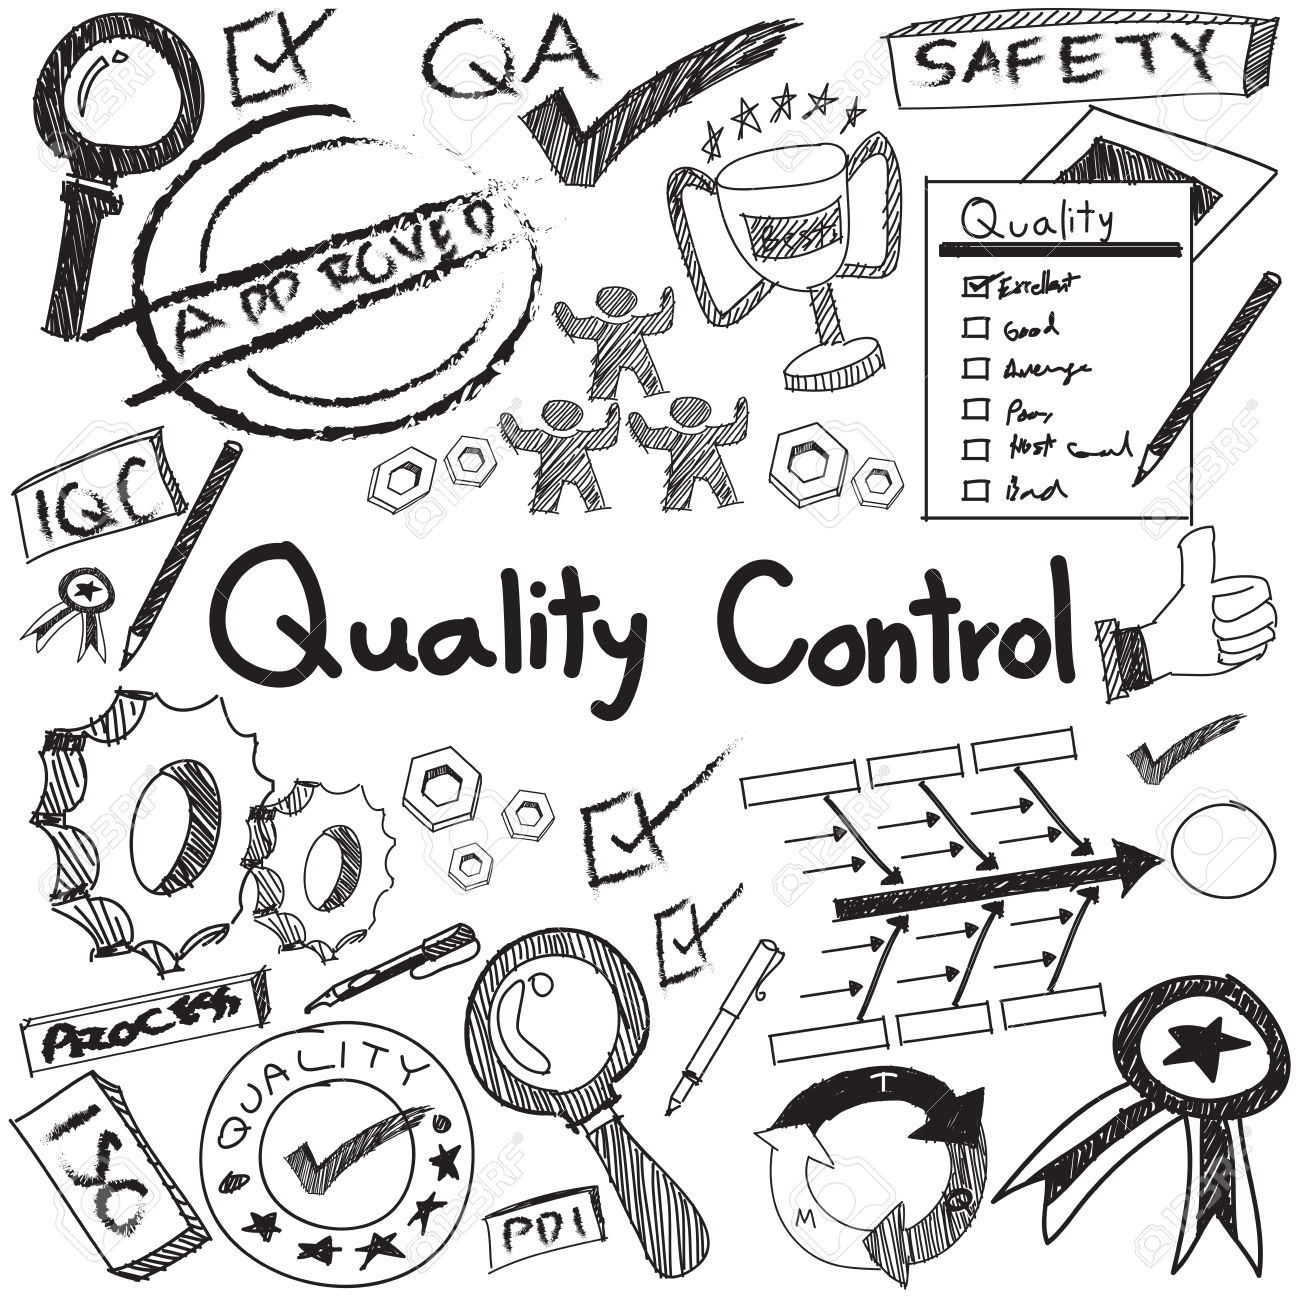 Quality control in manufacturing industry production and operati